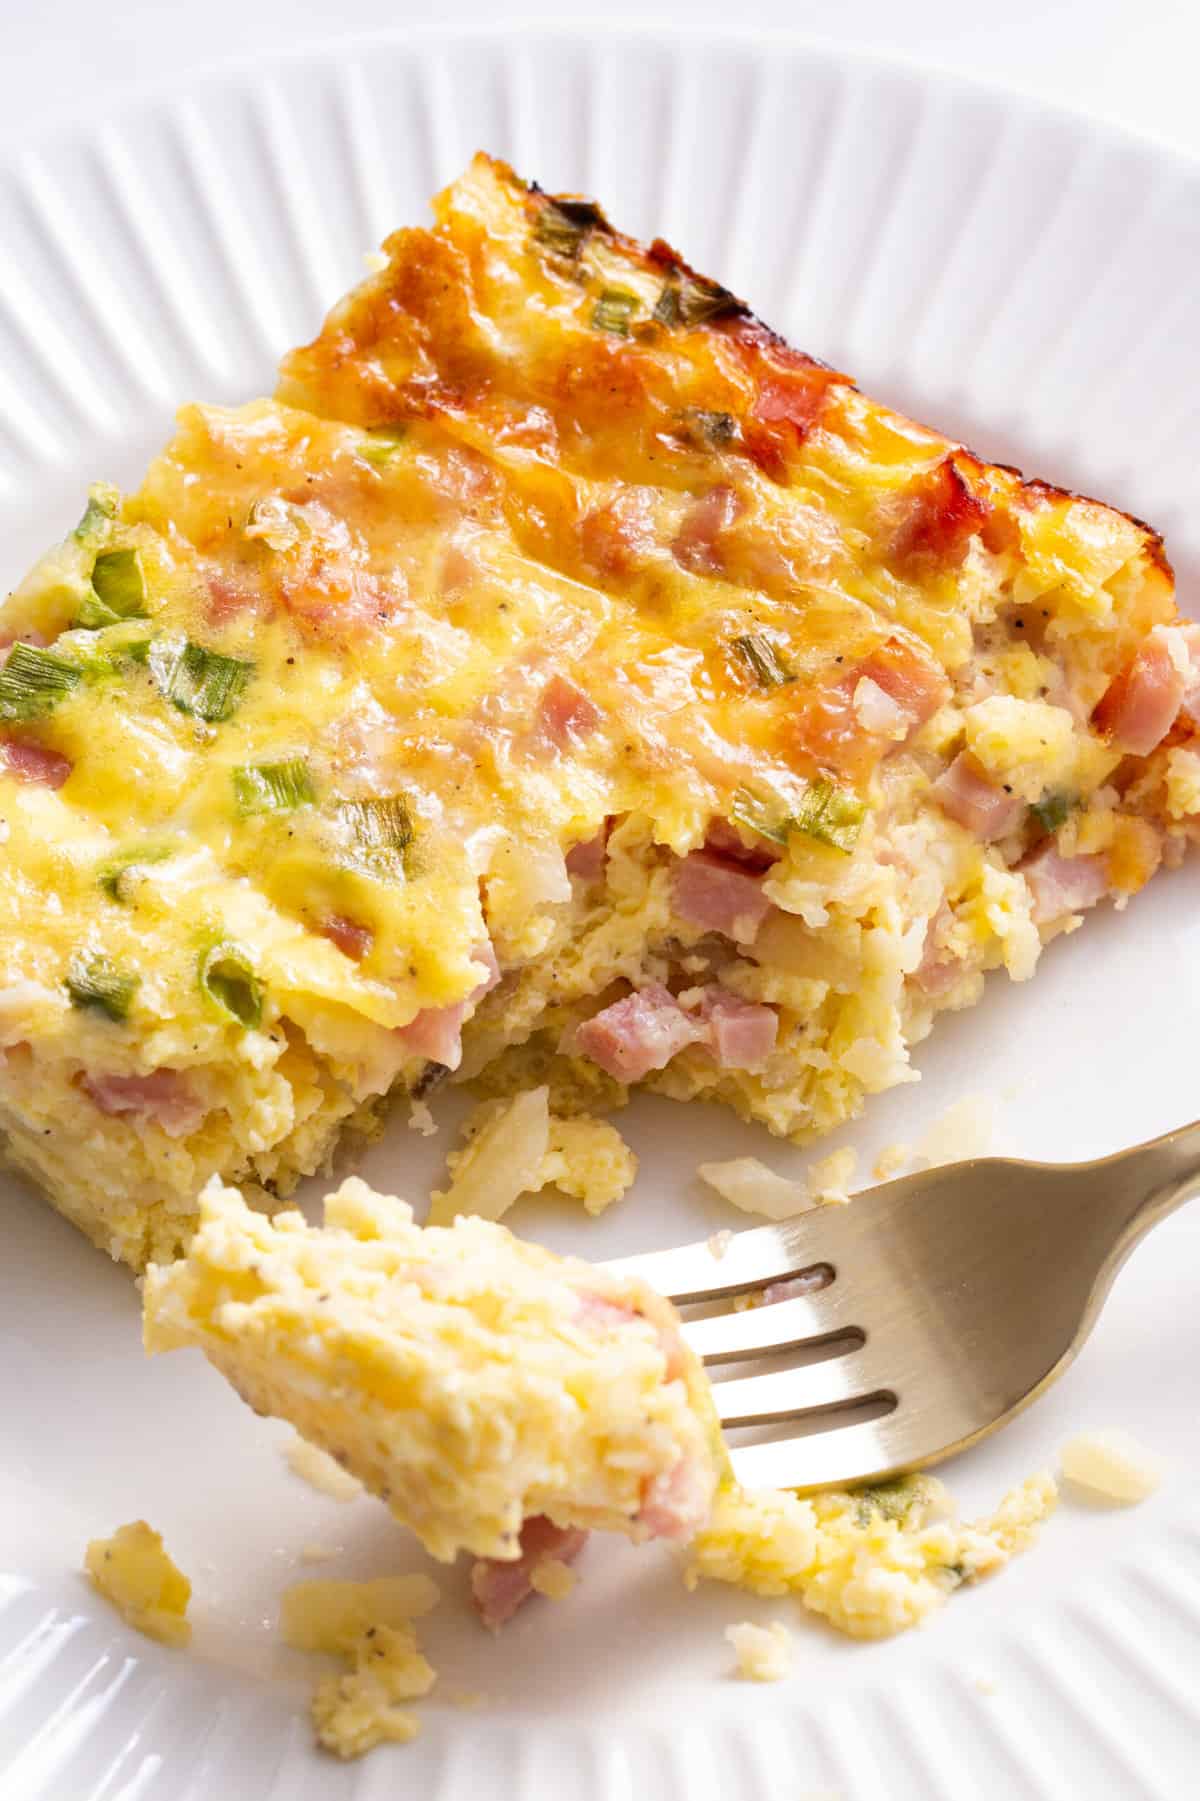 Close up image of a serving of farmer's breakfast casserole sitting on a white round plate with a forkful of casserole